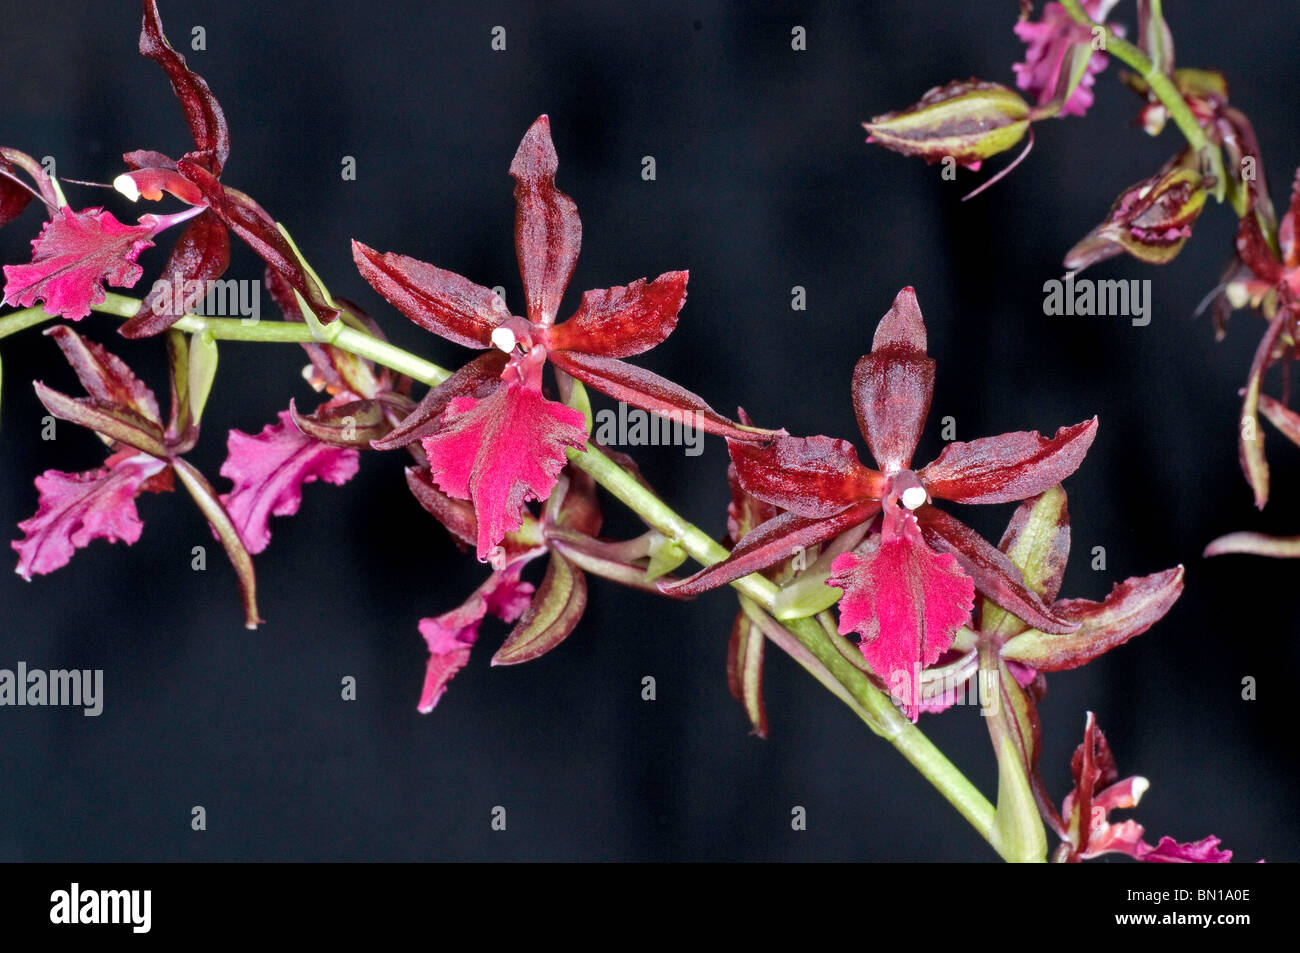 Flowering stem of the exotic Cambria (Vuylstekeana) orchid Stock Photo